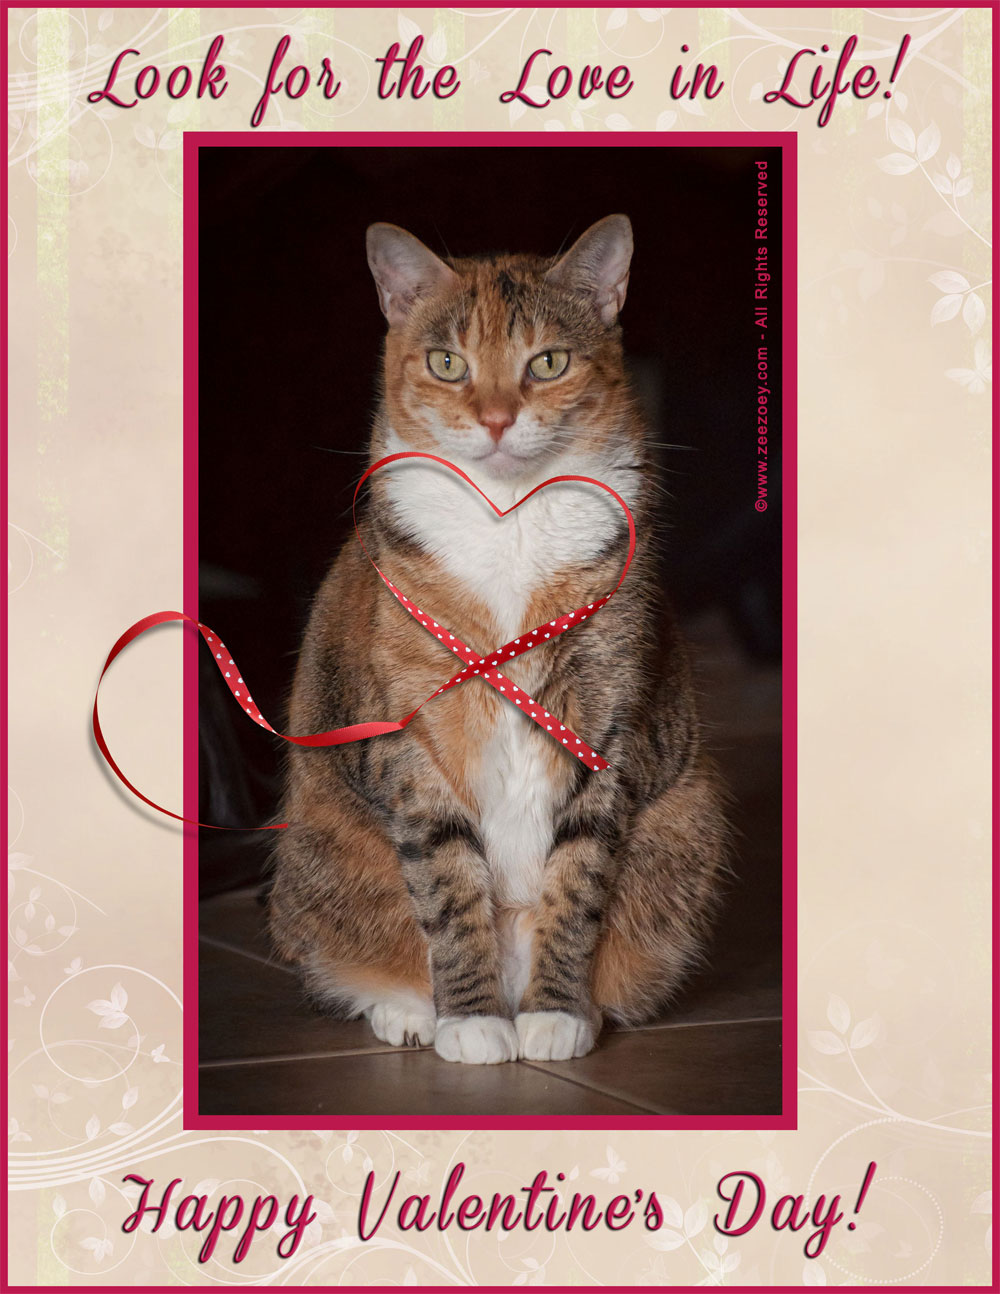 Cats that have distinguishing heart shaped markings